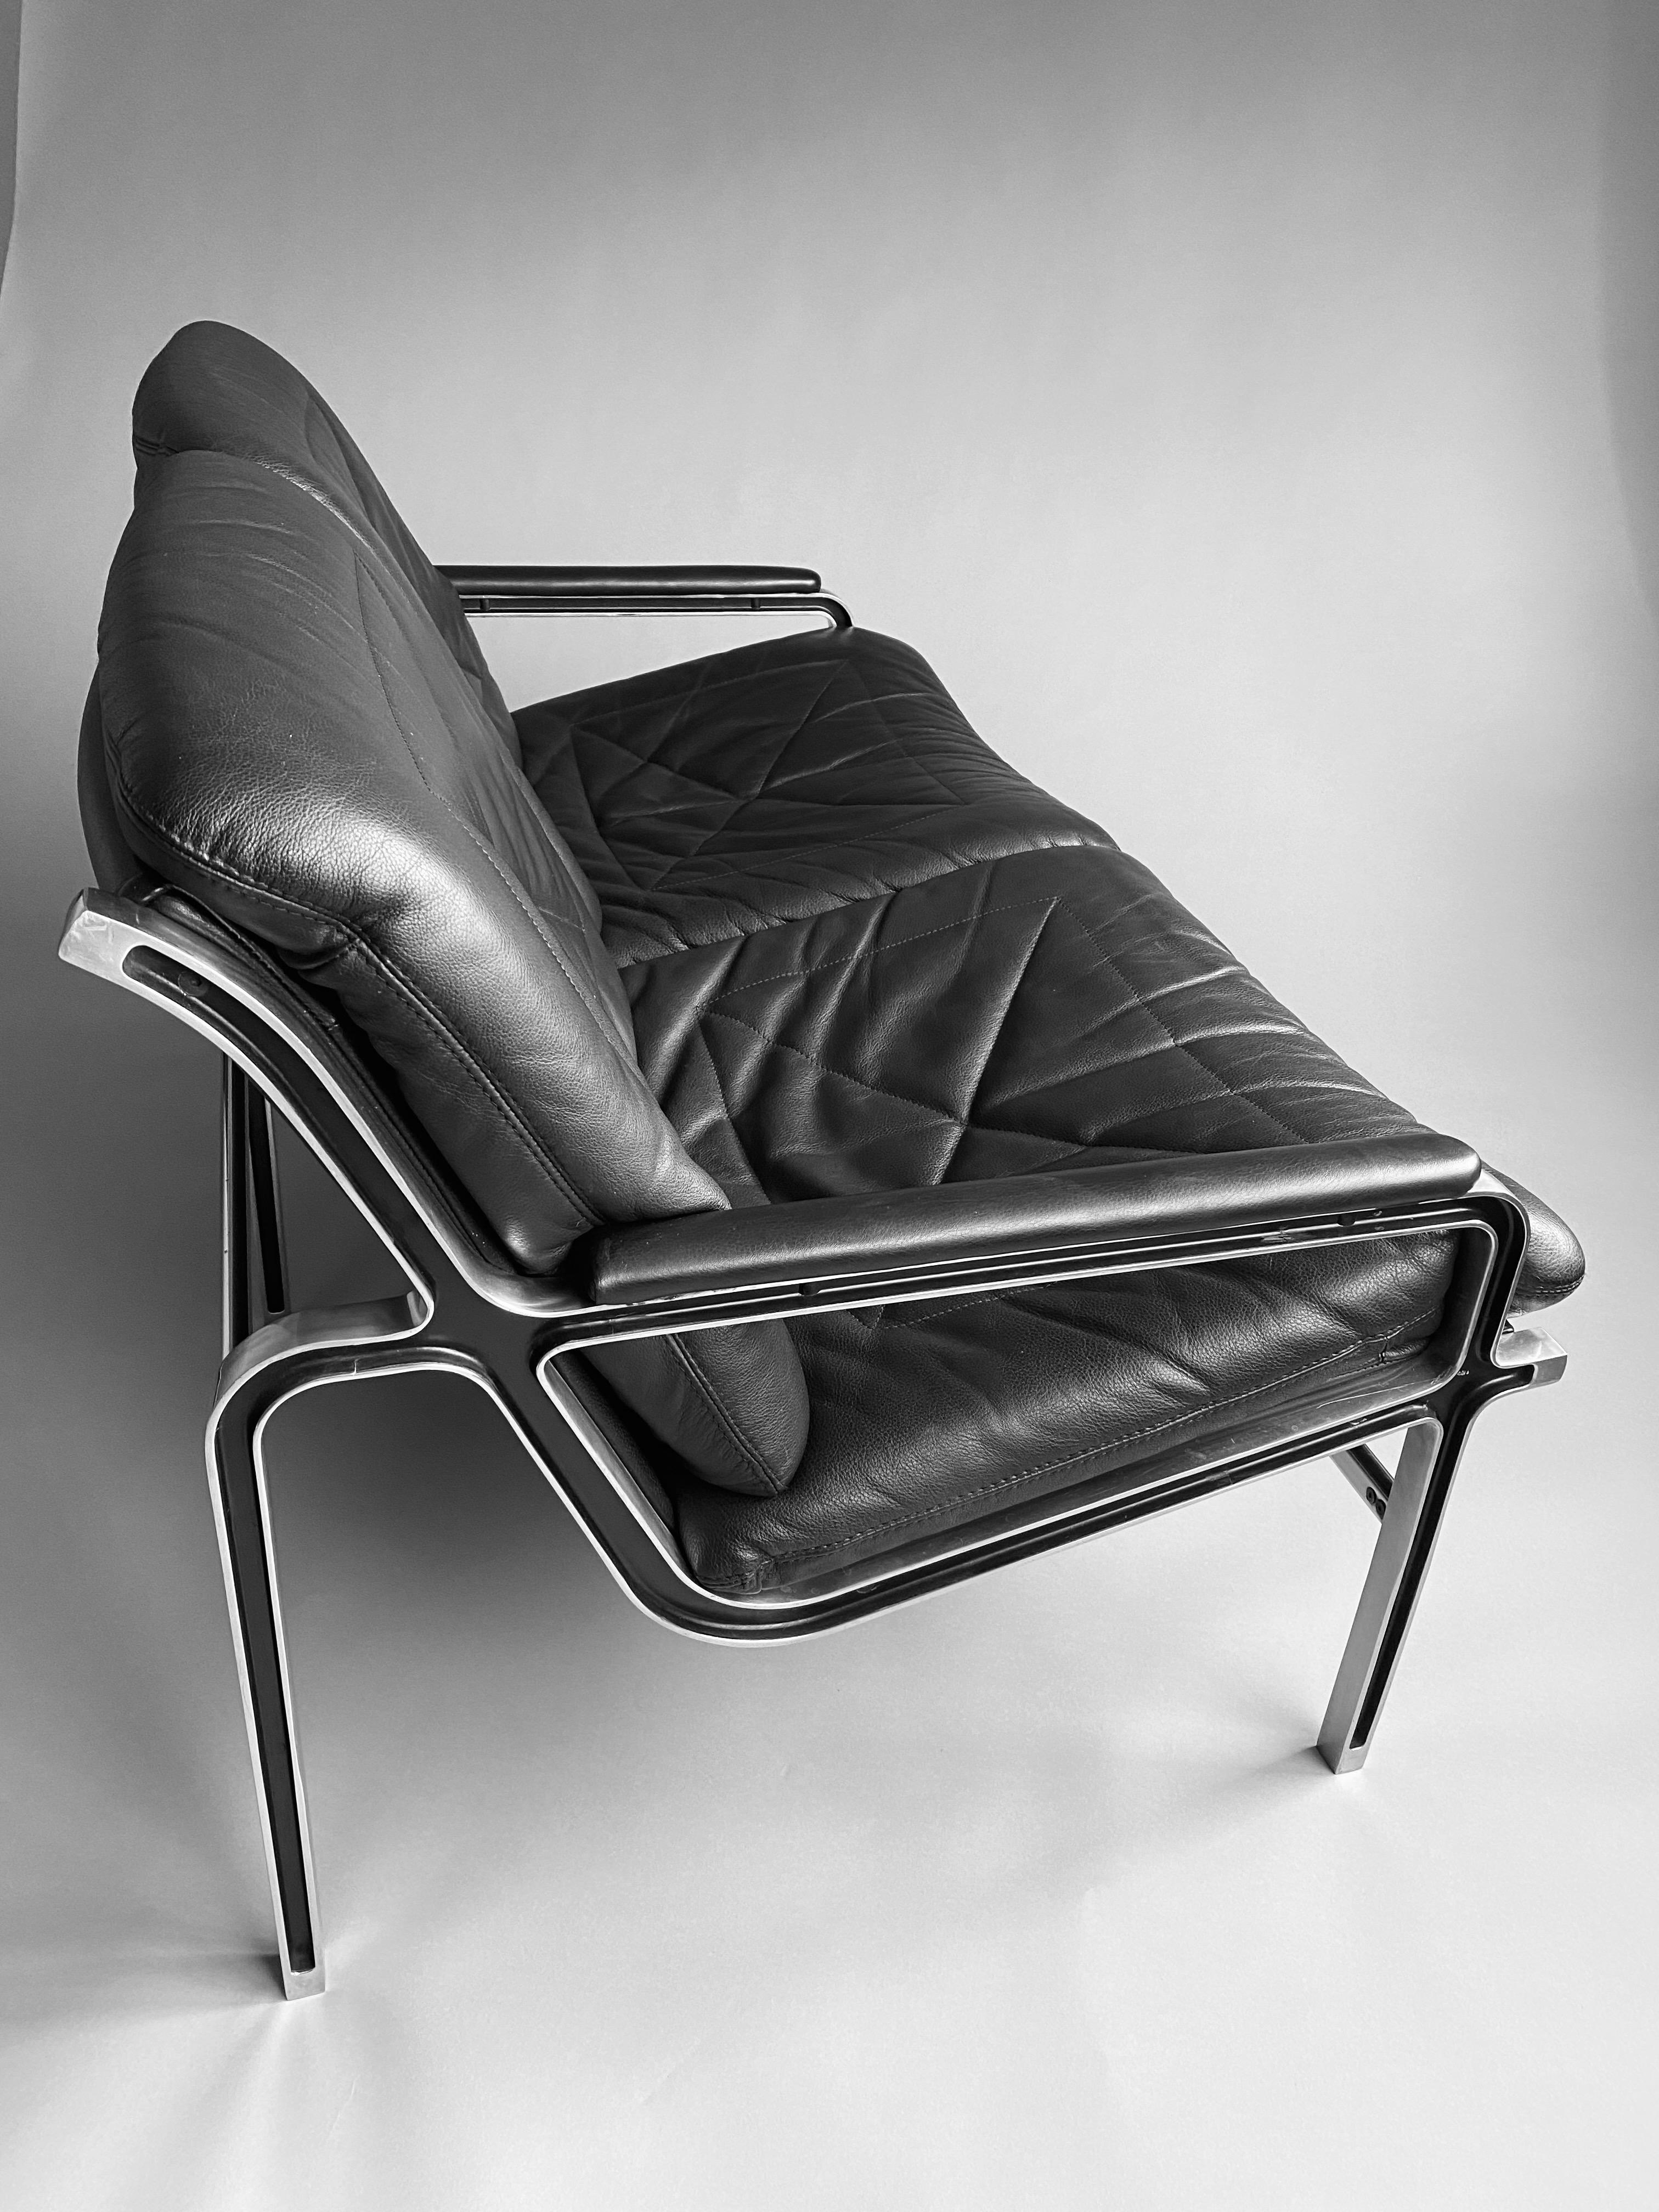 Andre Vanden Beuck Aluminium and Black Leather Sofa For Sale 3